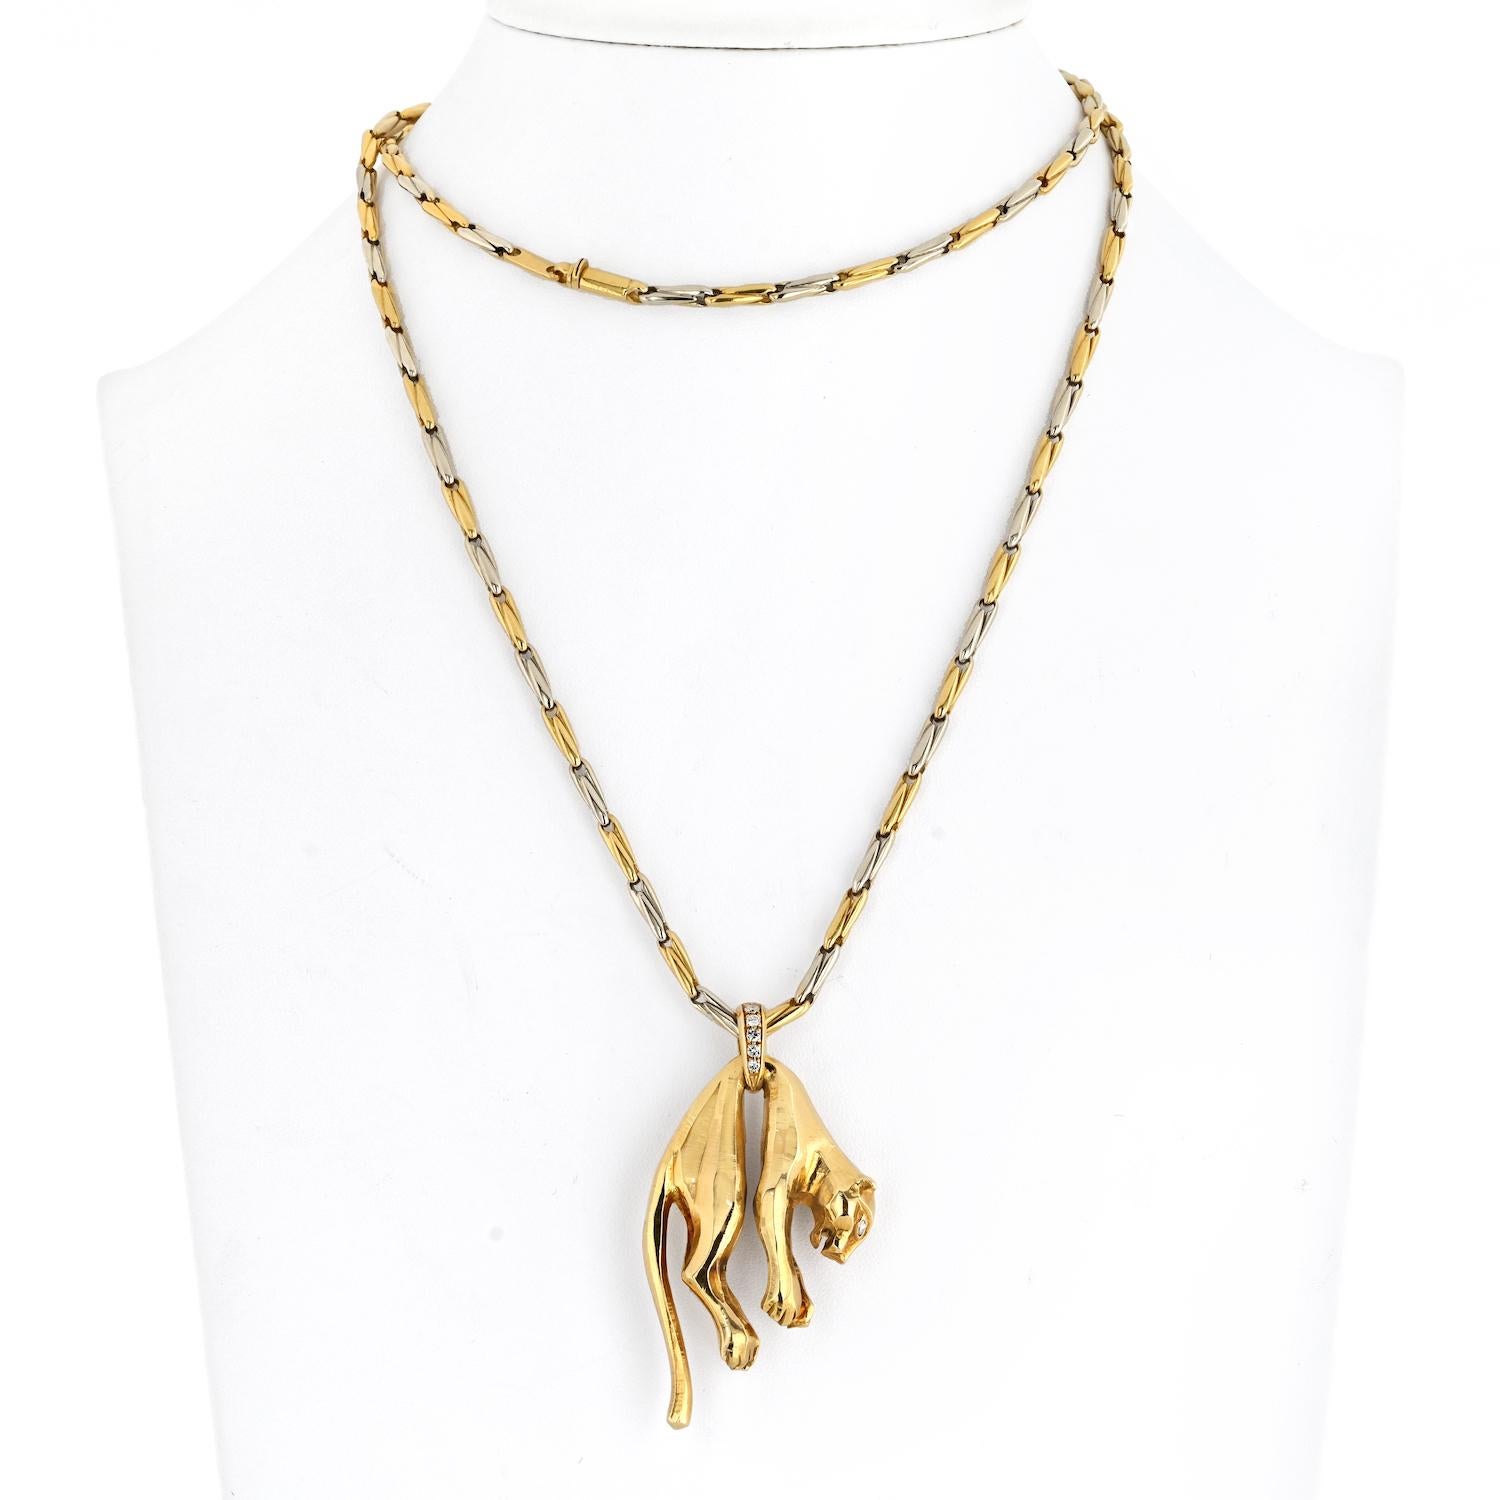 Elevate your style with this exceptional piece of jewelry—a hanging gold Cartier Panthere pendant suspended from an original Cartier chain necklace. Crafted in luxurious 18k yellow gold, this panther exudes a regal charm, measuring a striking 2